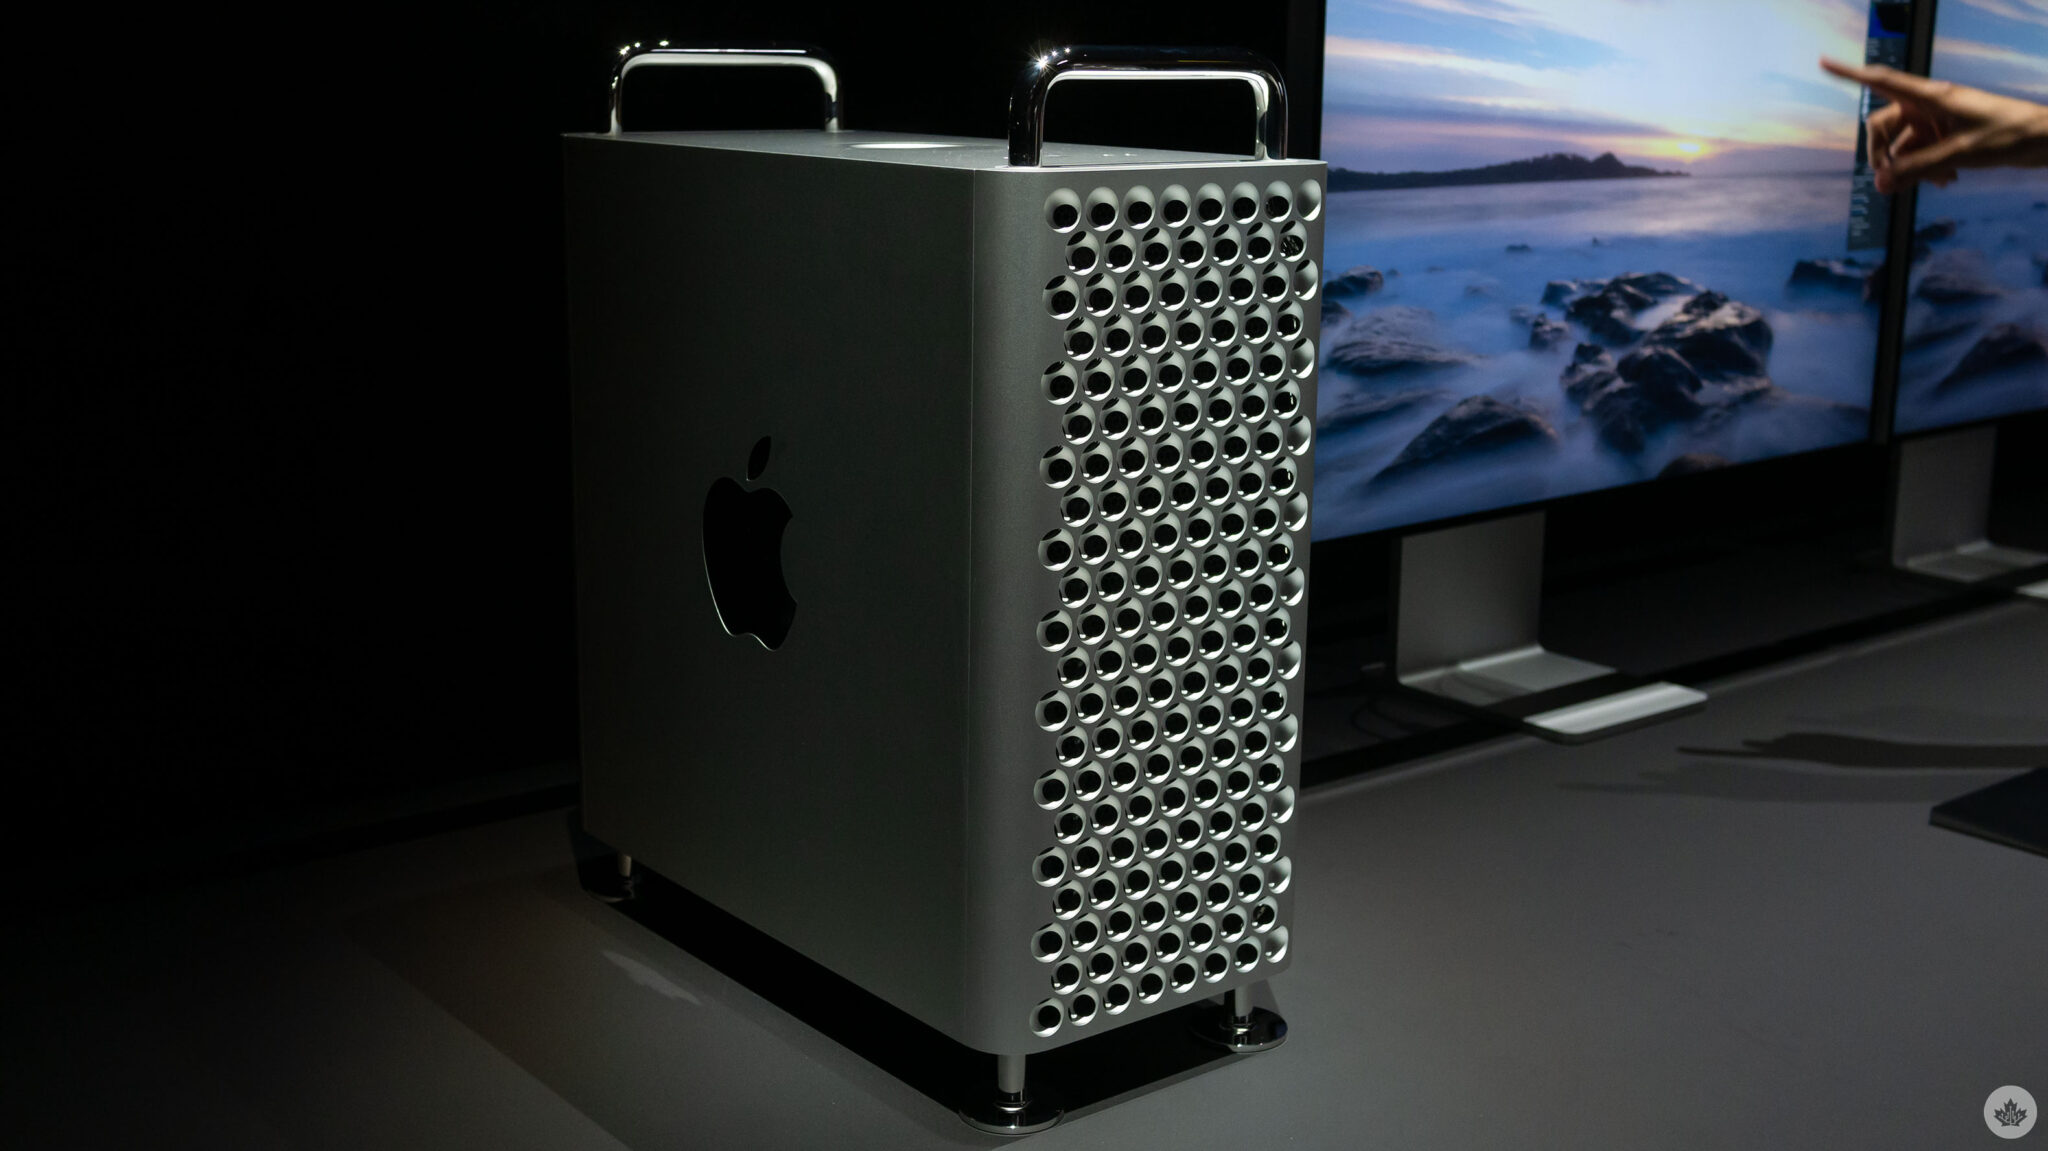 Apple updates Intel-powered Mac Pro with new graphic card options